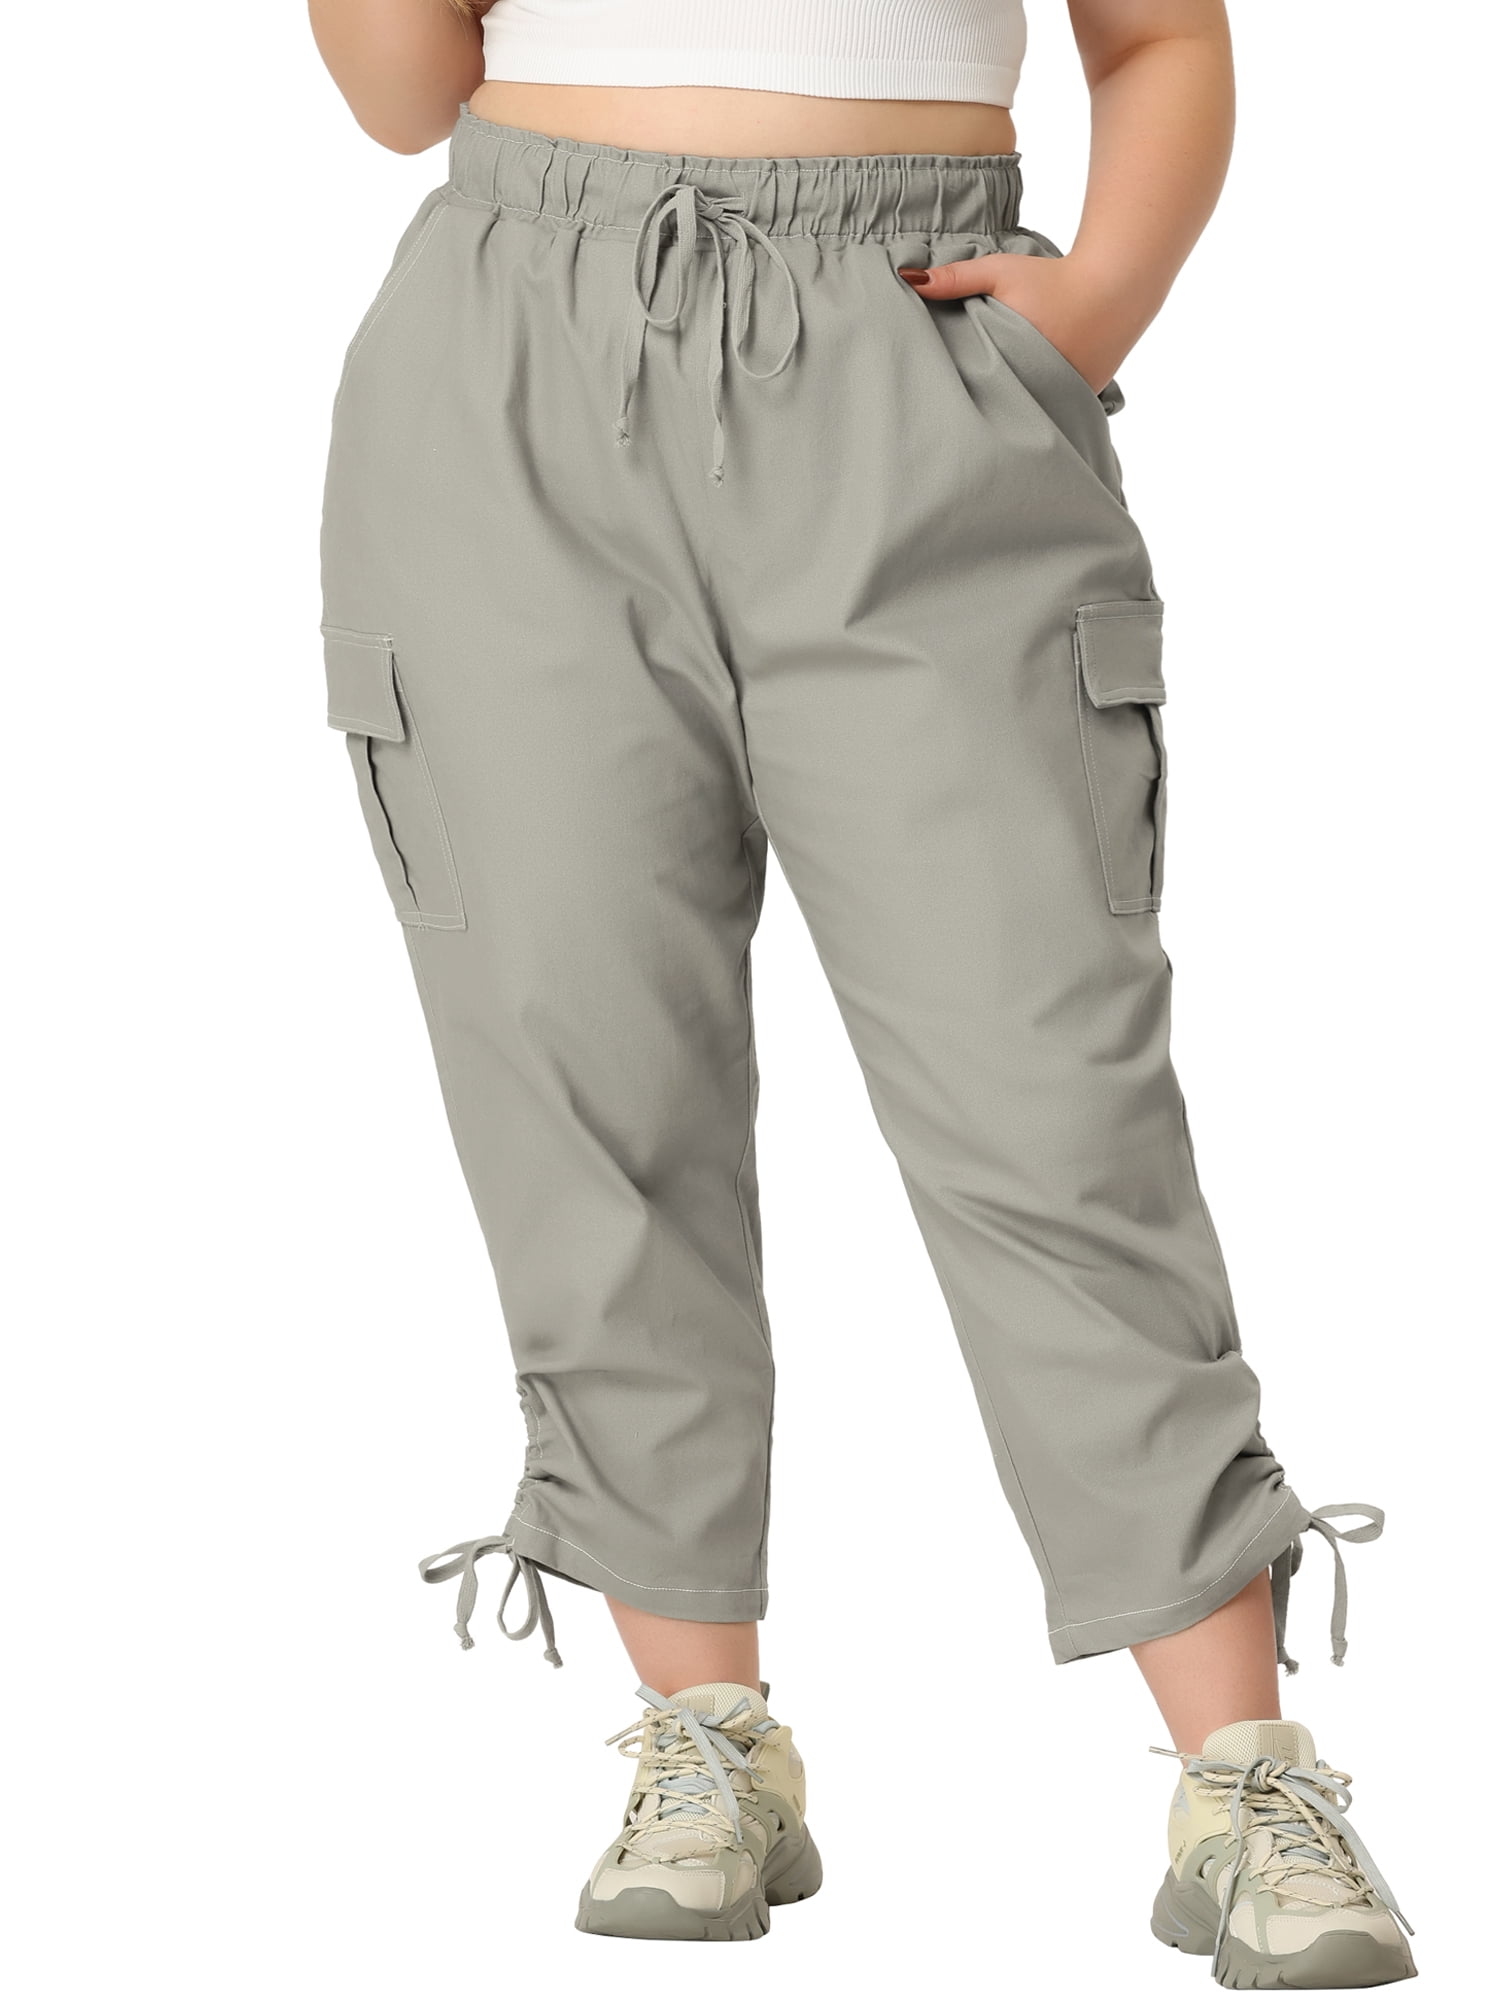 Stax. pants new with tags - AirRobe